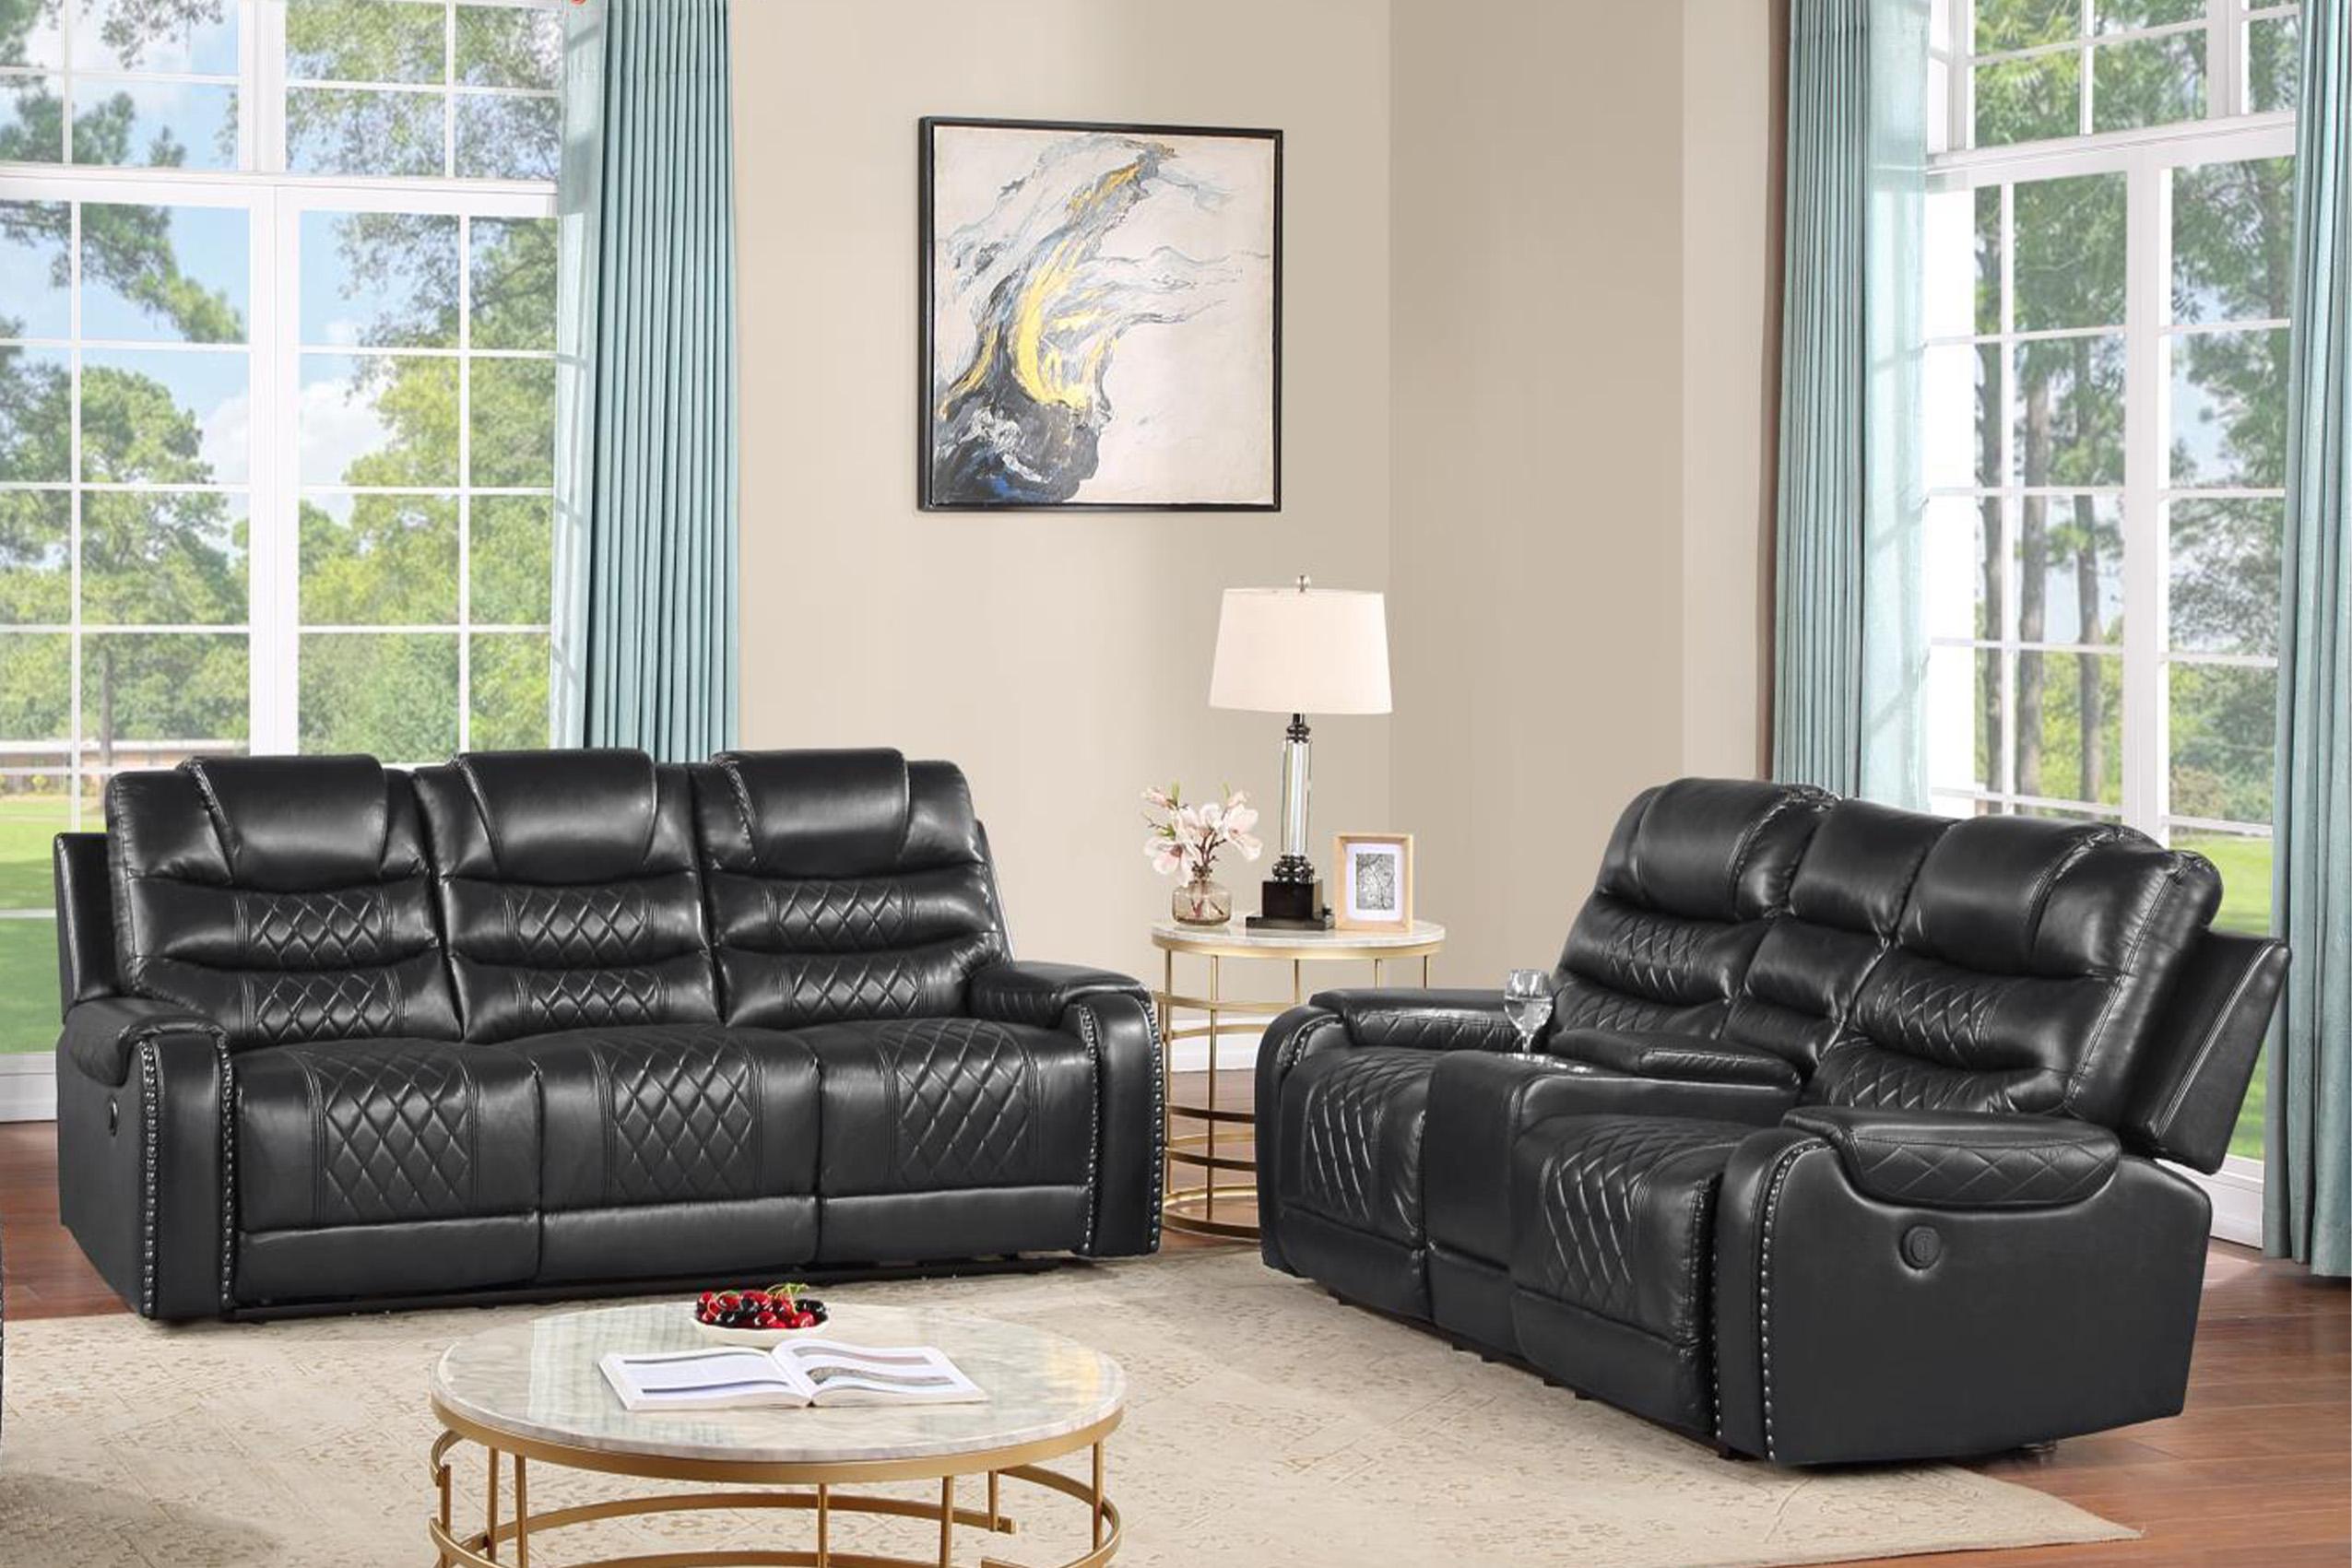 

    
GRAY Eco Leather Power Recliner Sofa Set 2Pcc TENNESSEE Galaxy Home Contemporary
